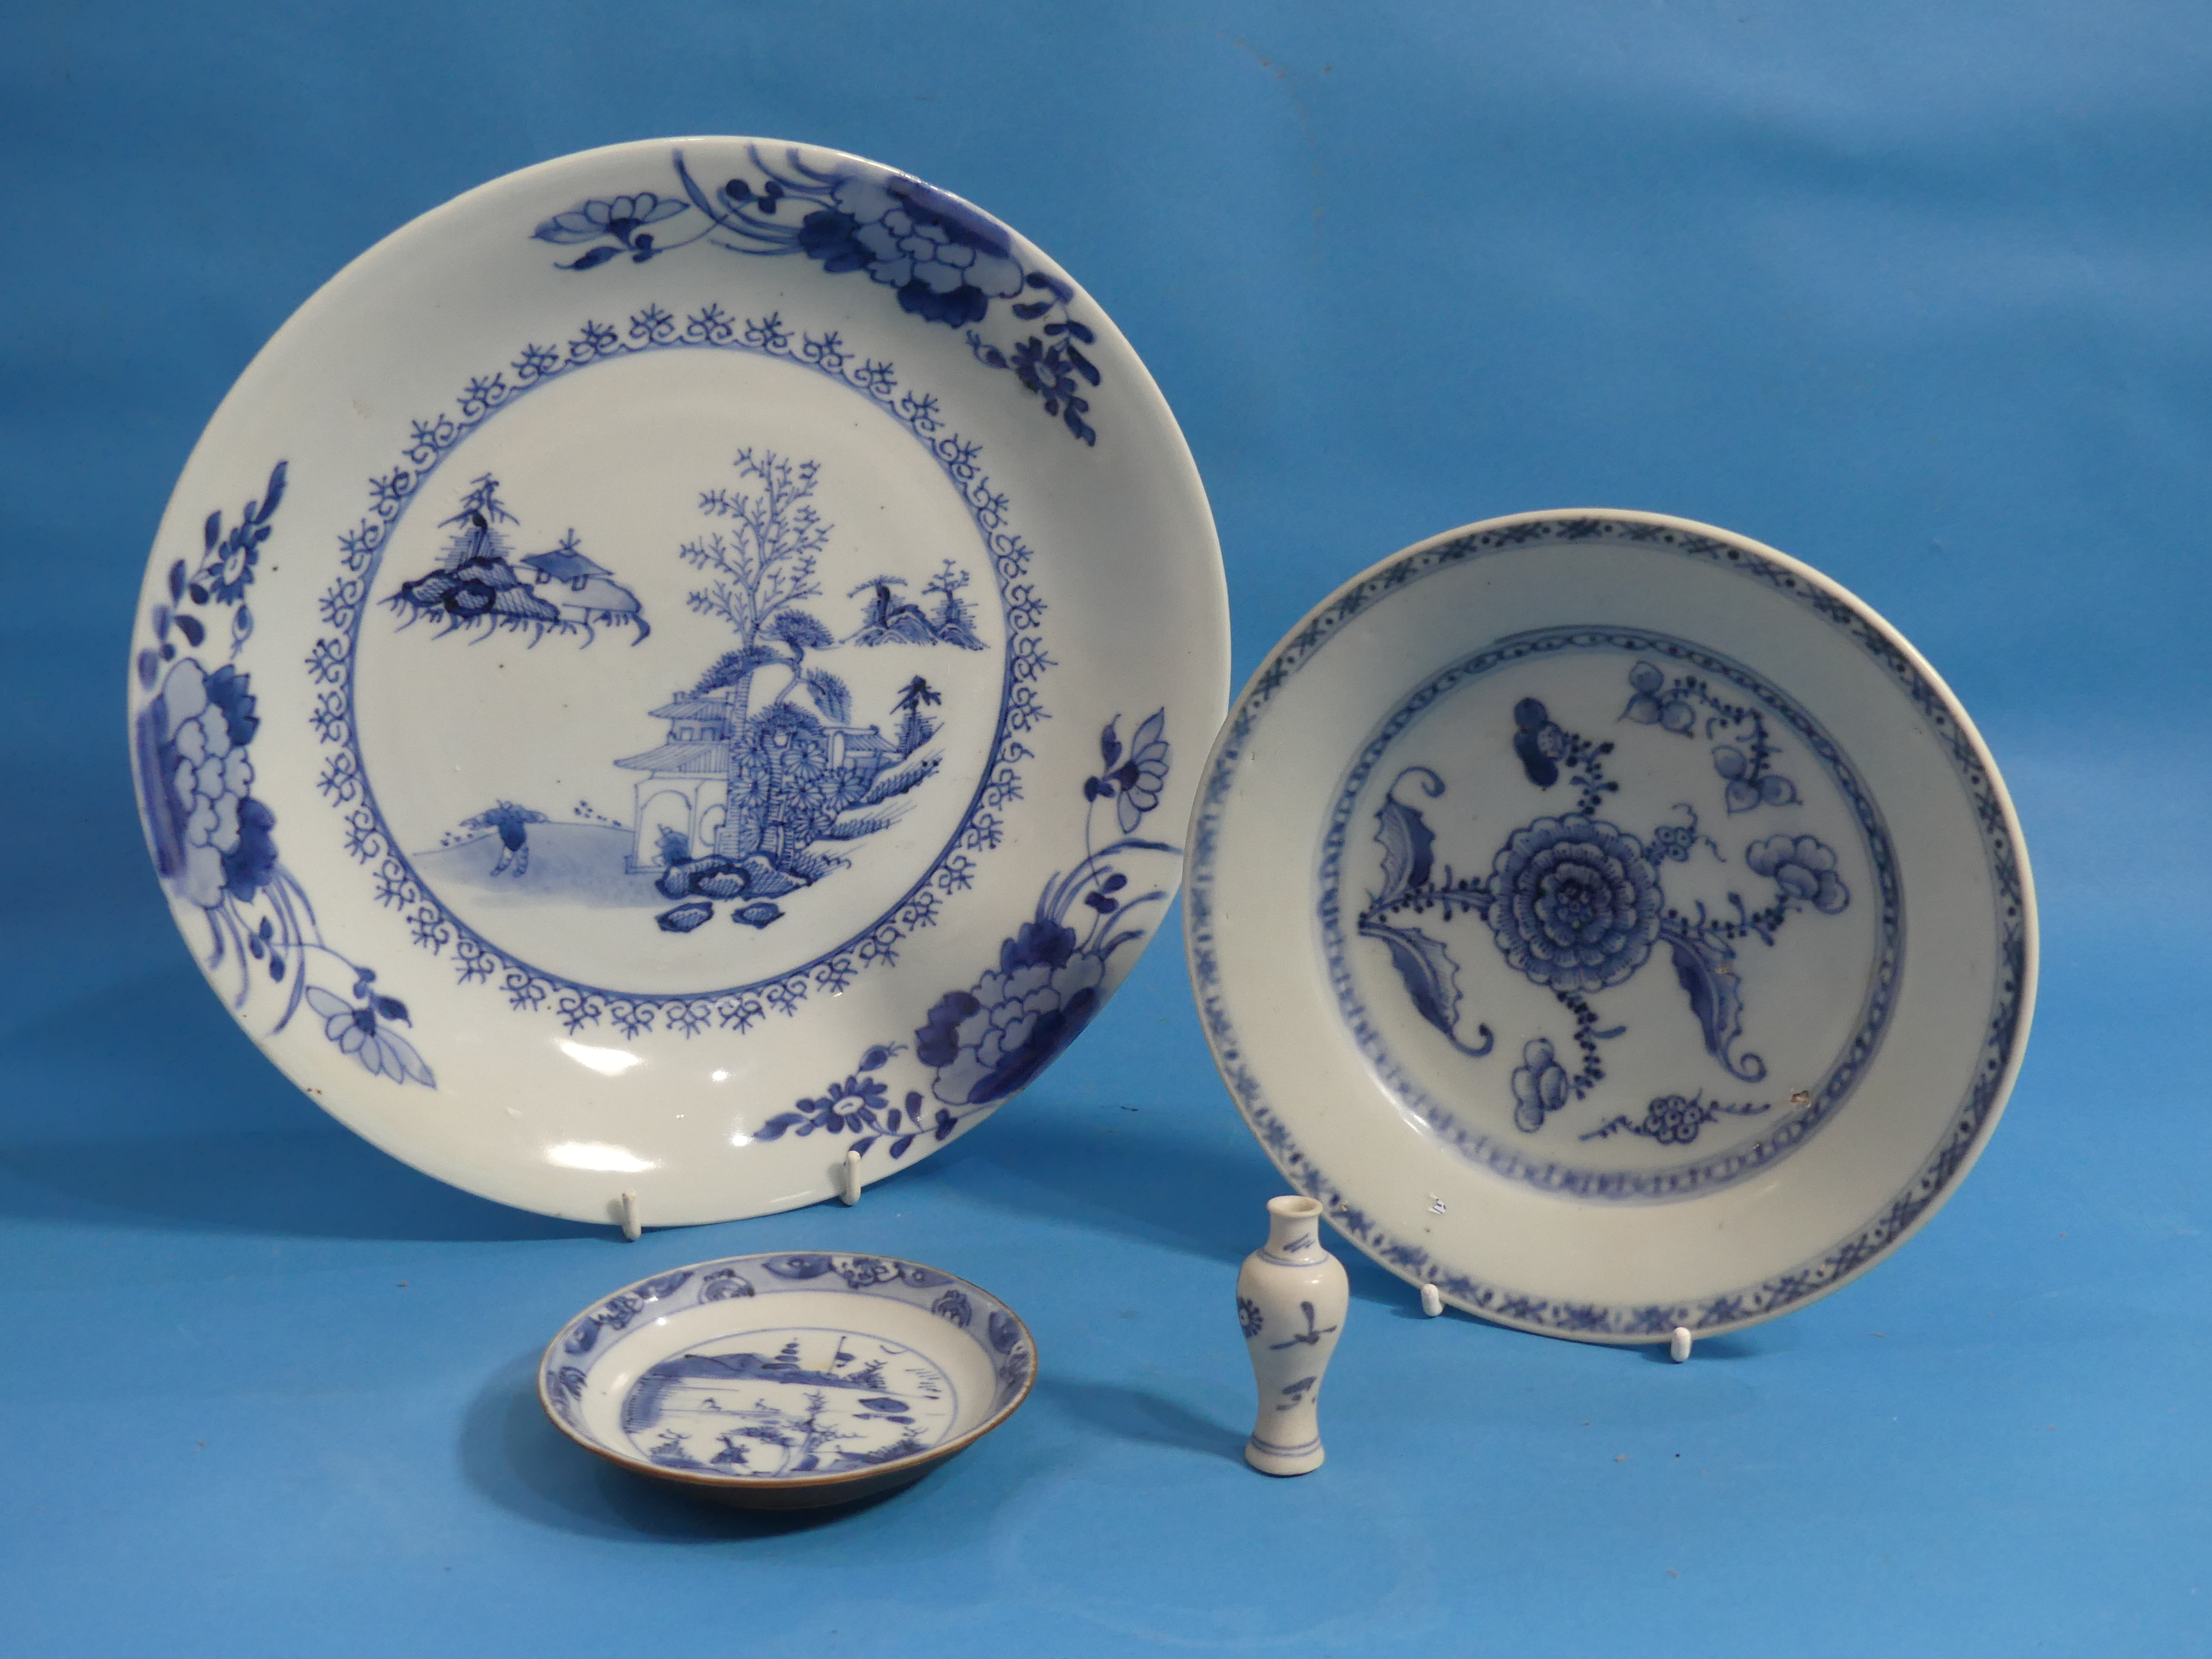 A Chinese export 'Nanking Cargo' blue and white porcelain Dish, decorated with trees and pavillions,